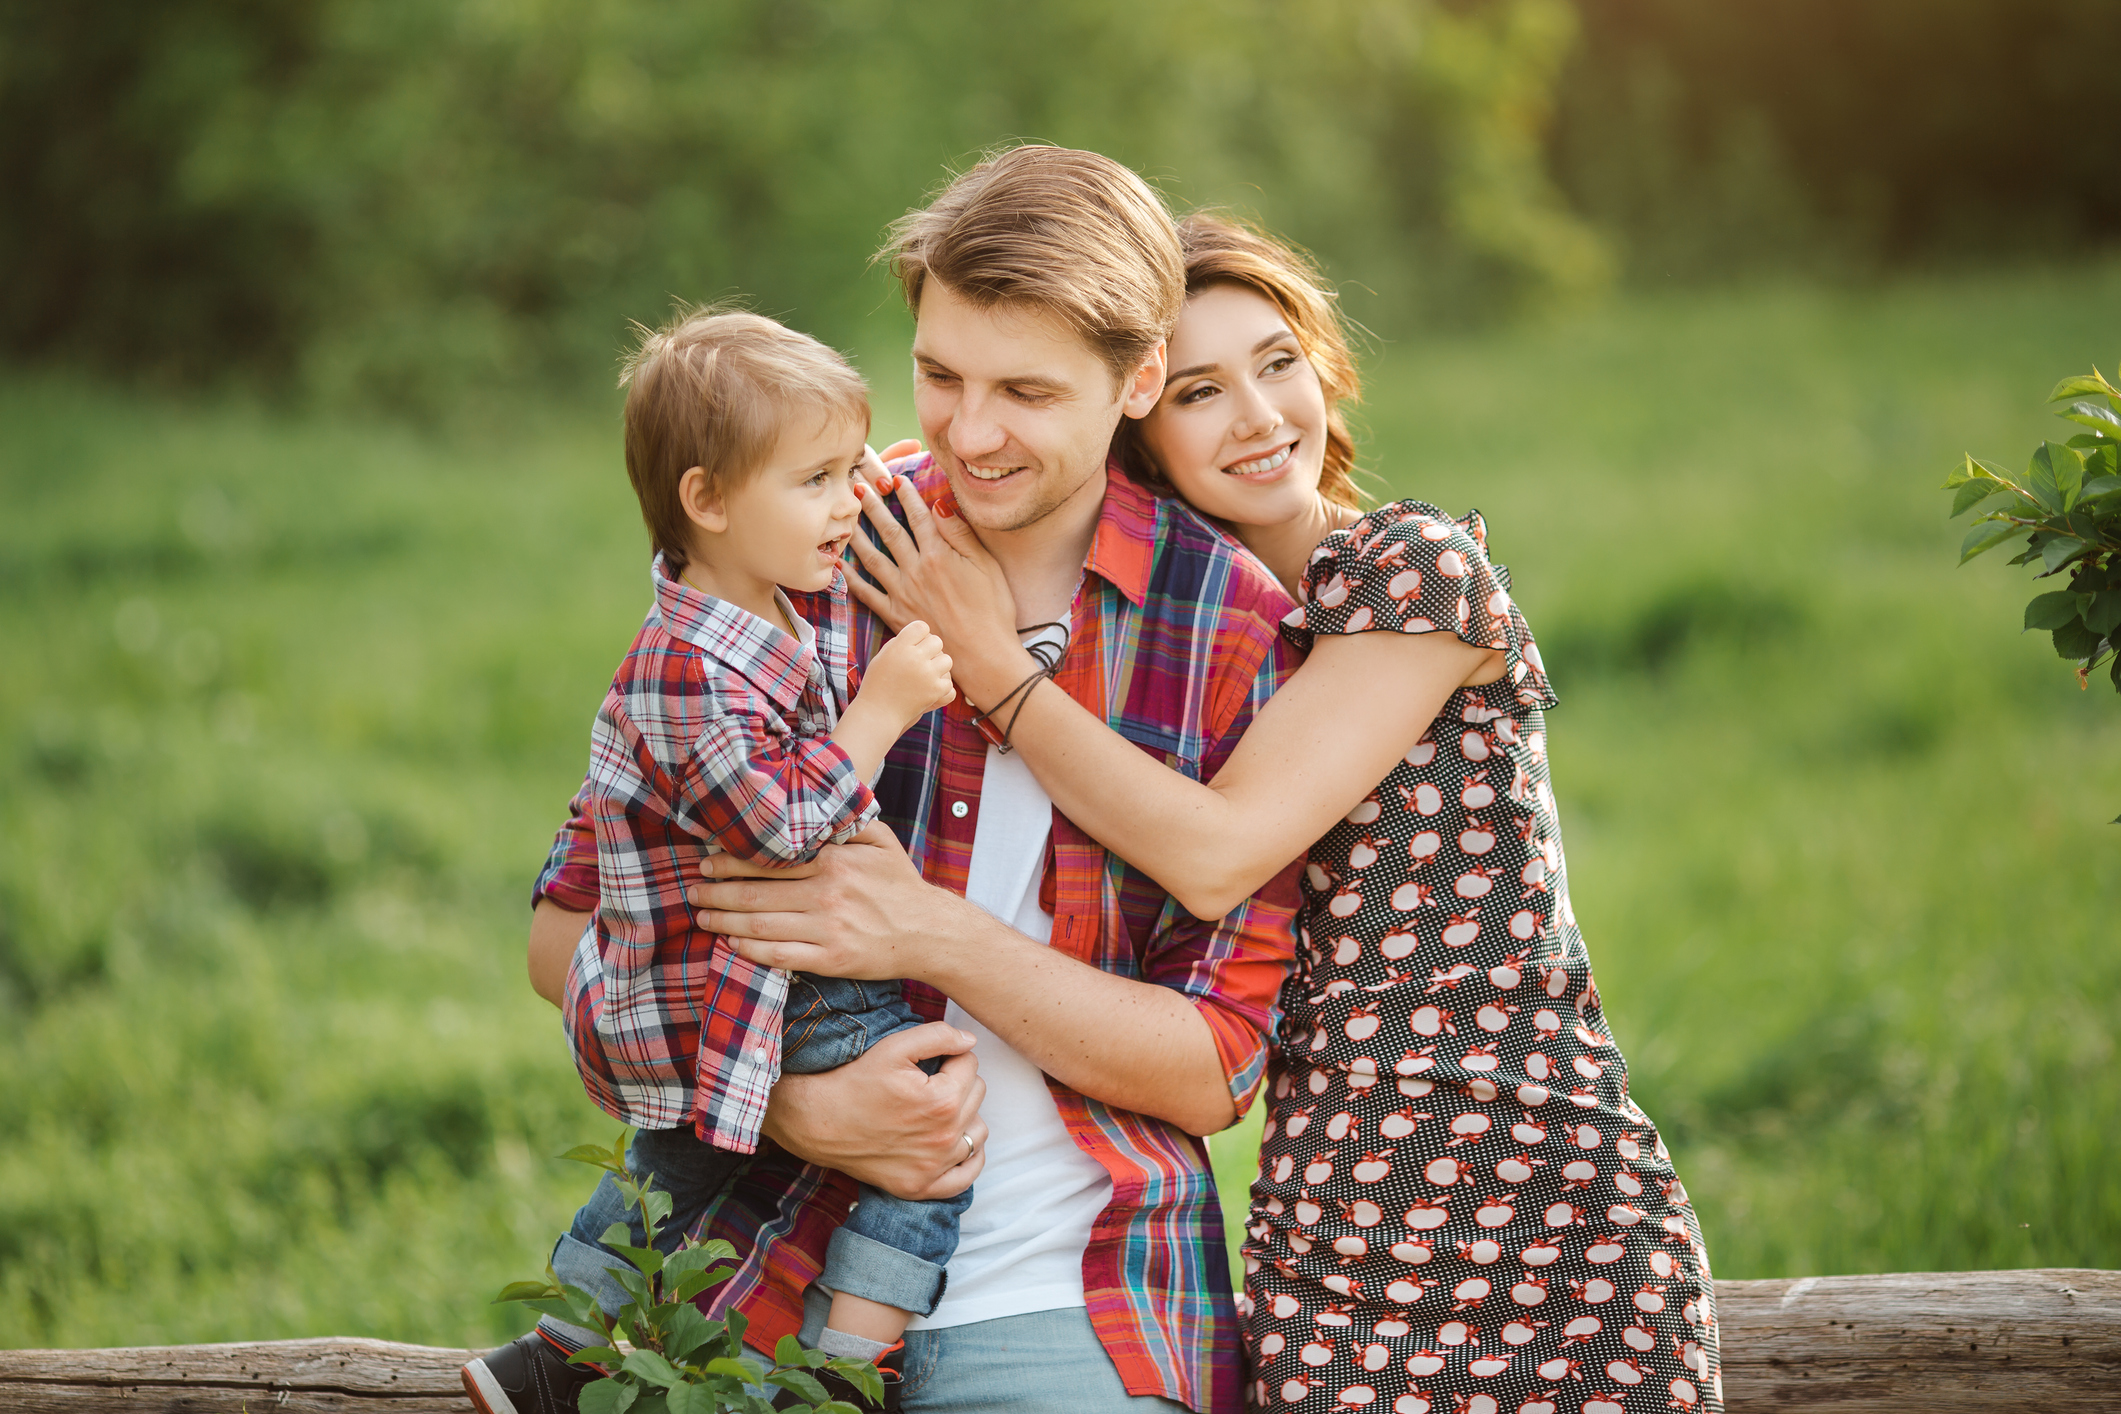 Life Insurance Quotes: Looking Out For Loved Ones